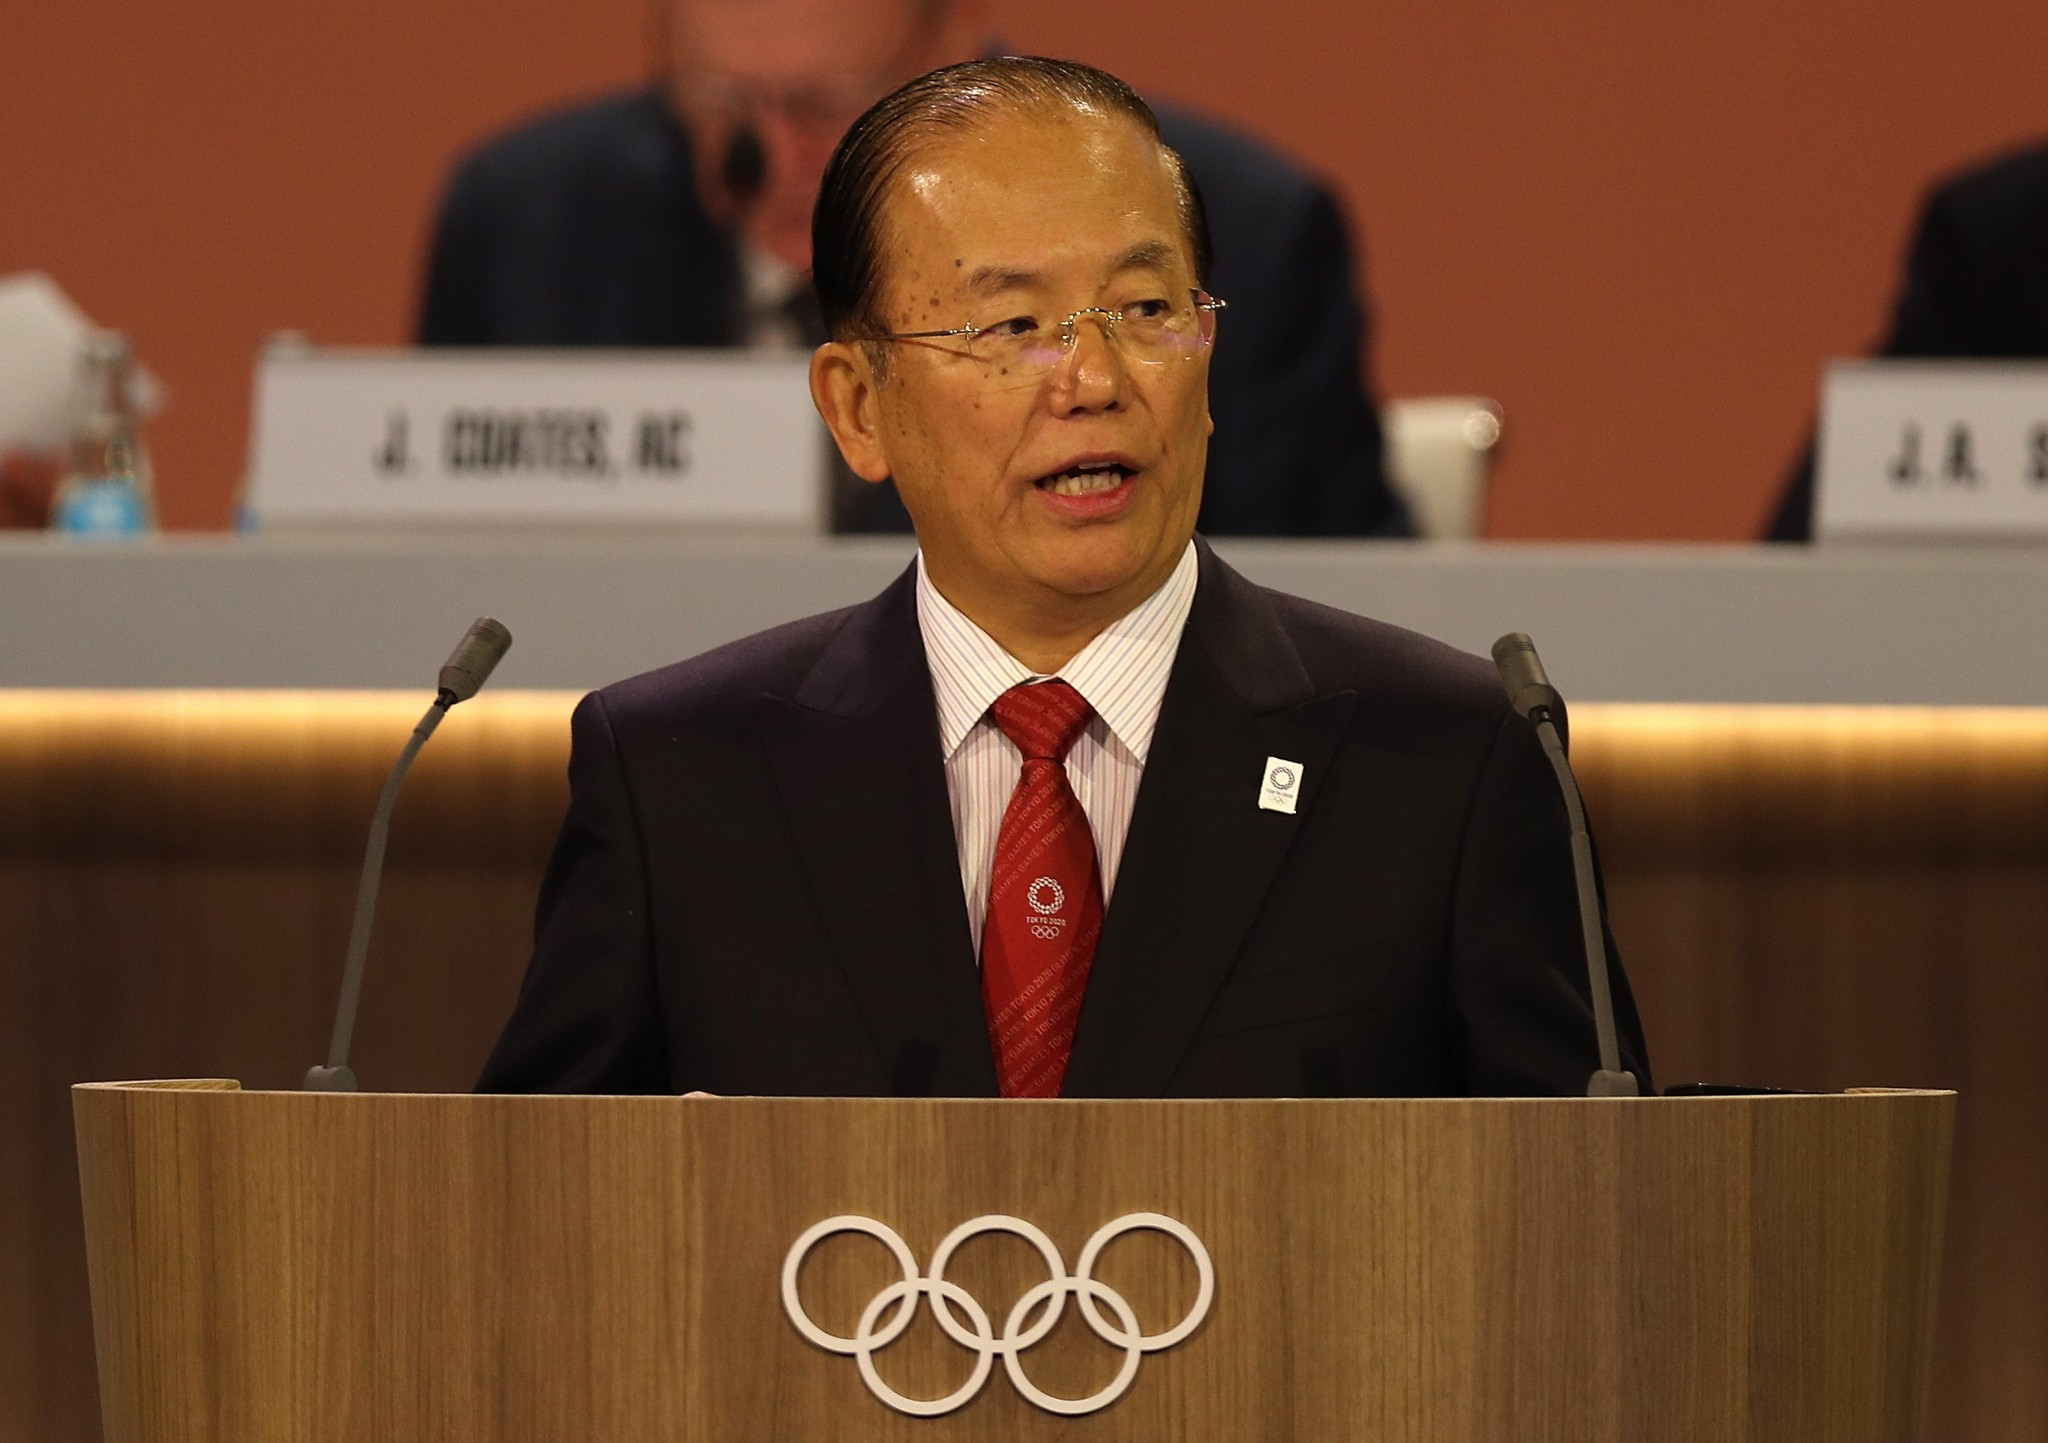 Tokyo 2020 were among the organisations to praise the Agenda 2020 reforms ©Getty Images